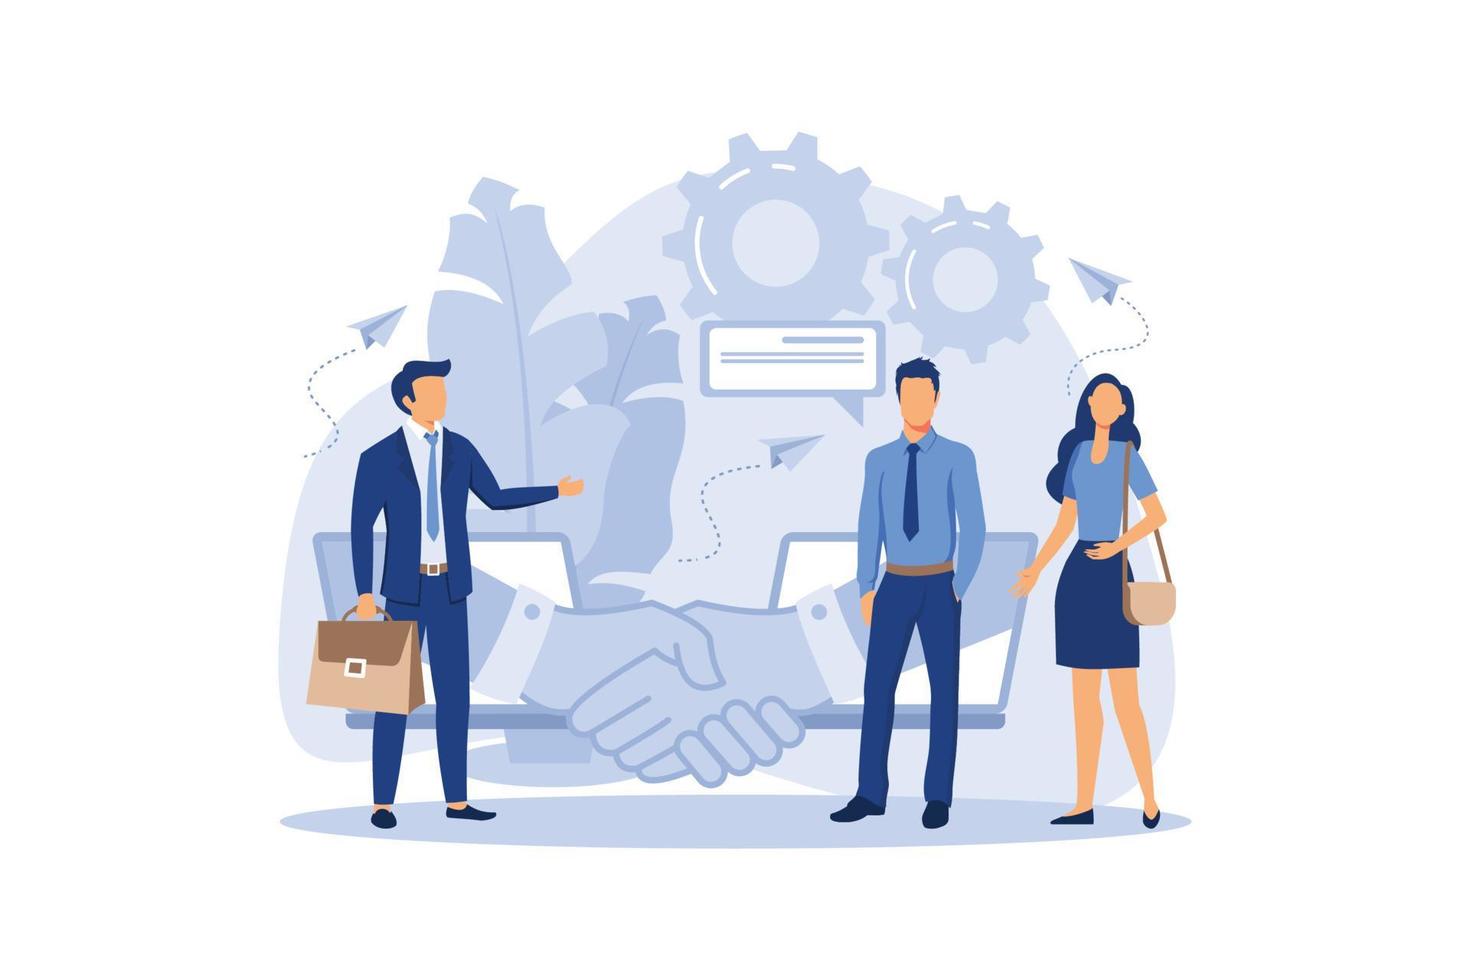 online conclusion of the transaction. the opening of a new startup. business handshake, via phone and laptop flat modern design illustration vector